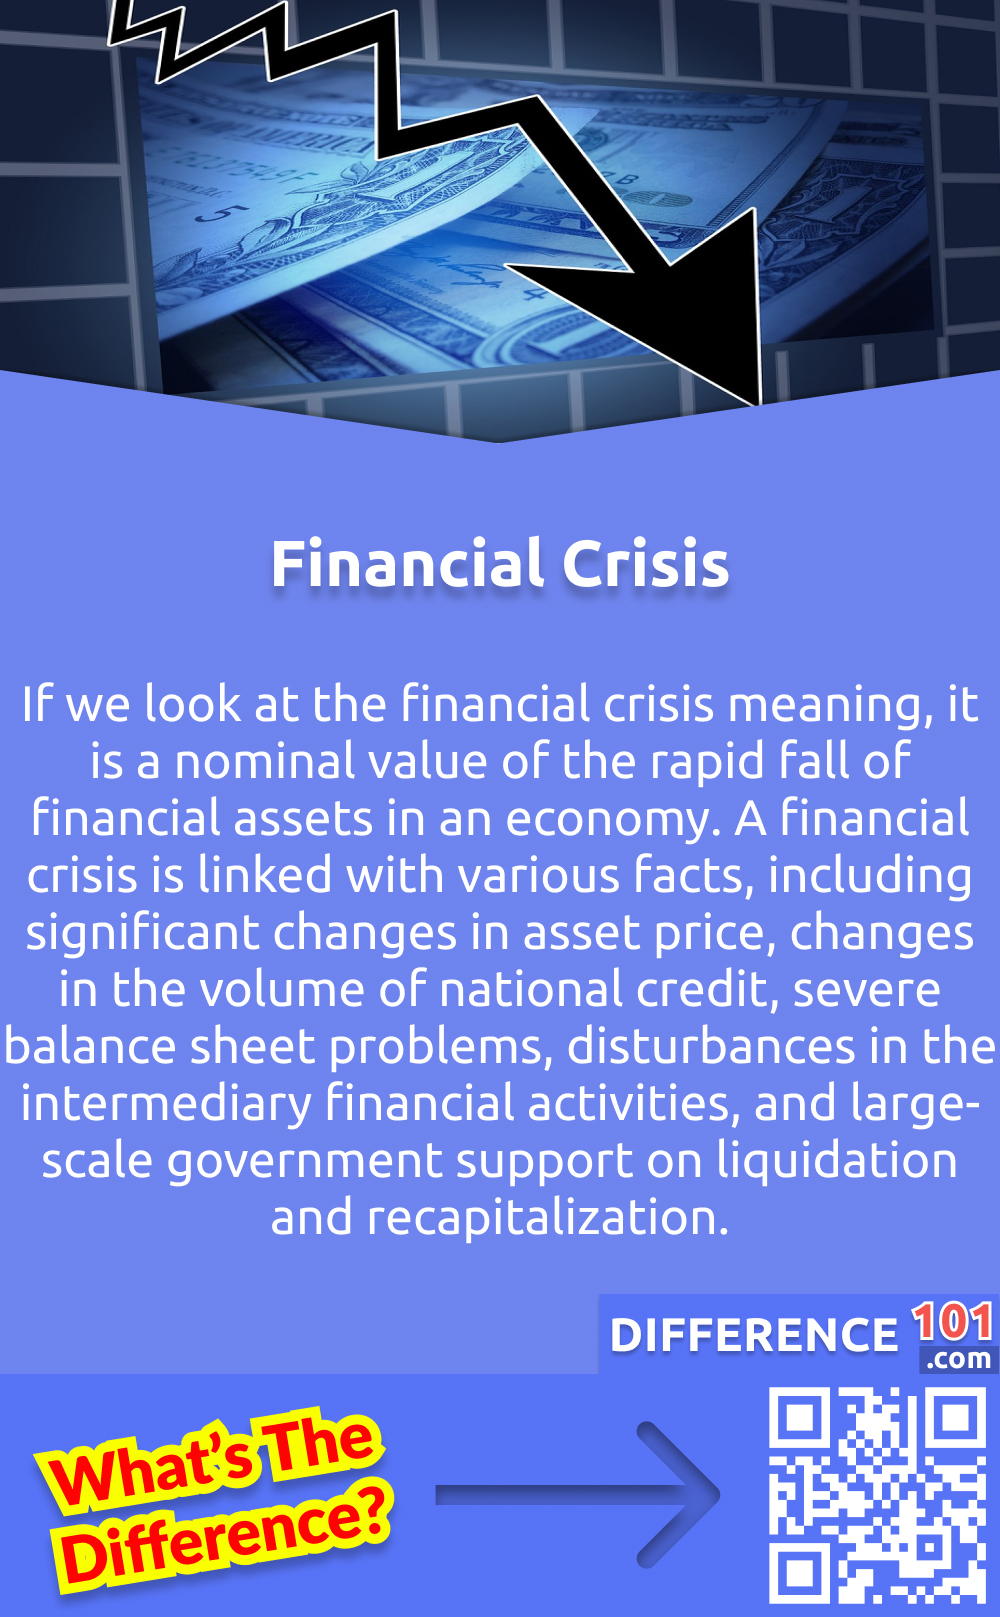 What Is A Financial Crisis? If we look at the financial crisis meaning, it is a nominal value of the rapid fall of financial assets in an economy. A financial crisis is linked with various facts, including significant changes in asset price, changes in the volume of national credit, severe balance sheet problems, disturbances in the intermediary financial activities, and large-scale government support on liquidation and recapitalization. Financial crisis are led by assets and credit movements. So if there is any kind of imbalance in asset price or credits, the economy becomes unstable and results in a financial crisis. Financial crisis may also occur due to the overvaluing of assets and will be intensified by the investor's behavior. If all these factors remain within a country's economy for a longer period, it may result in long-term economic recession and depression.